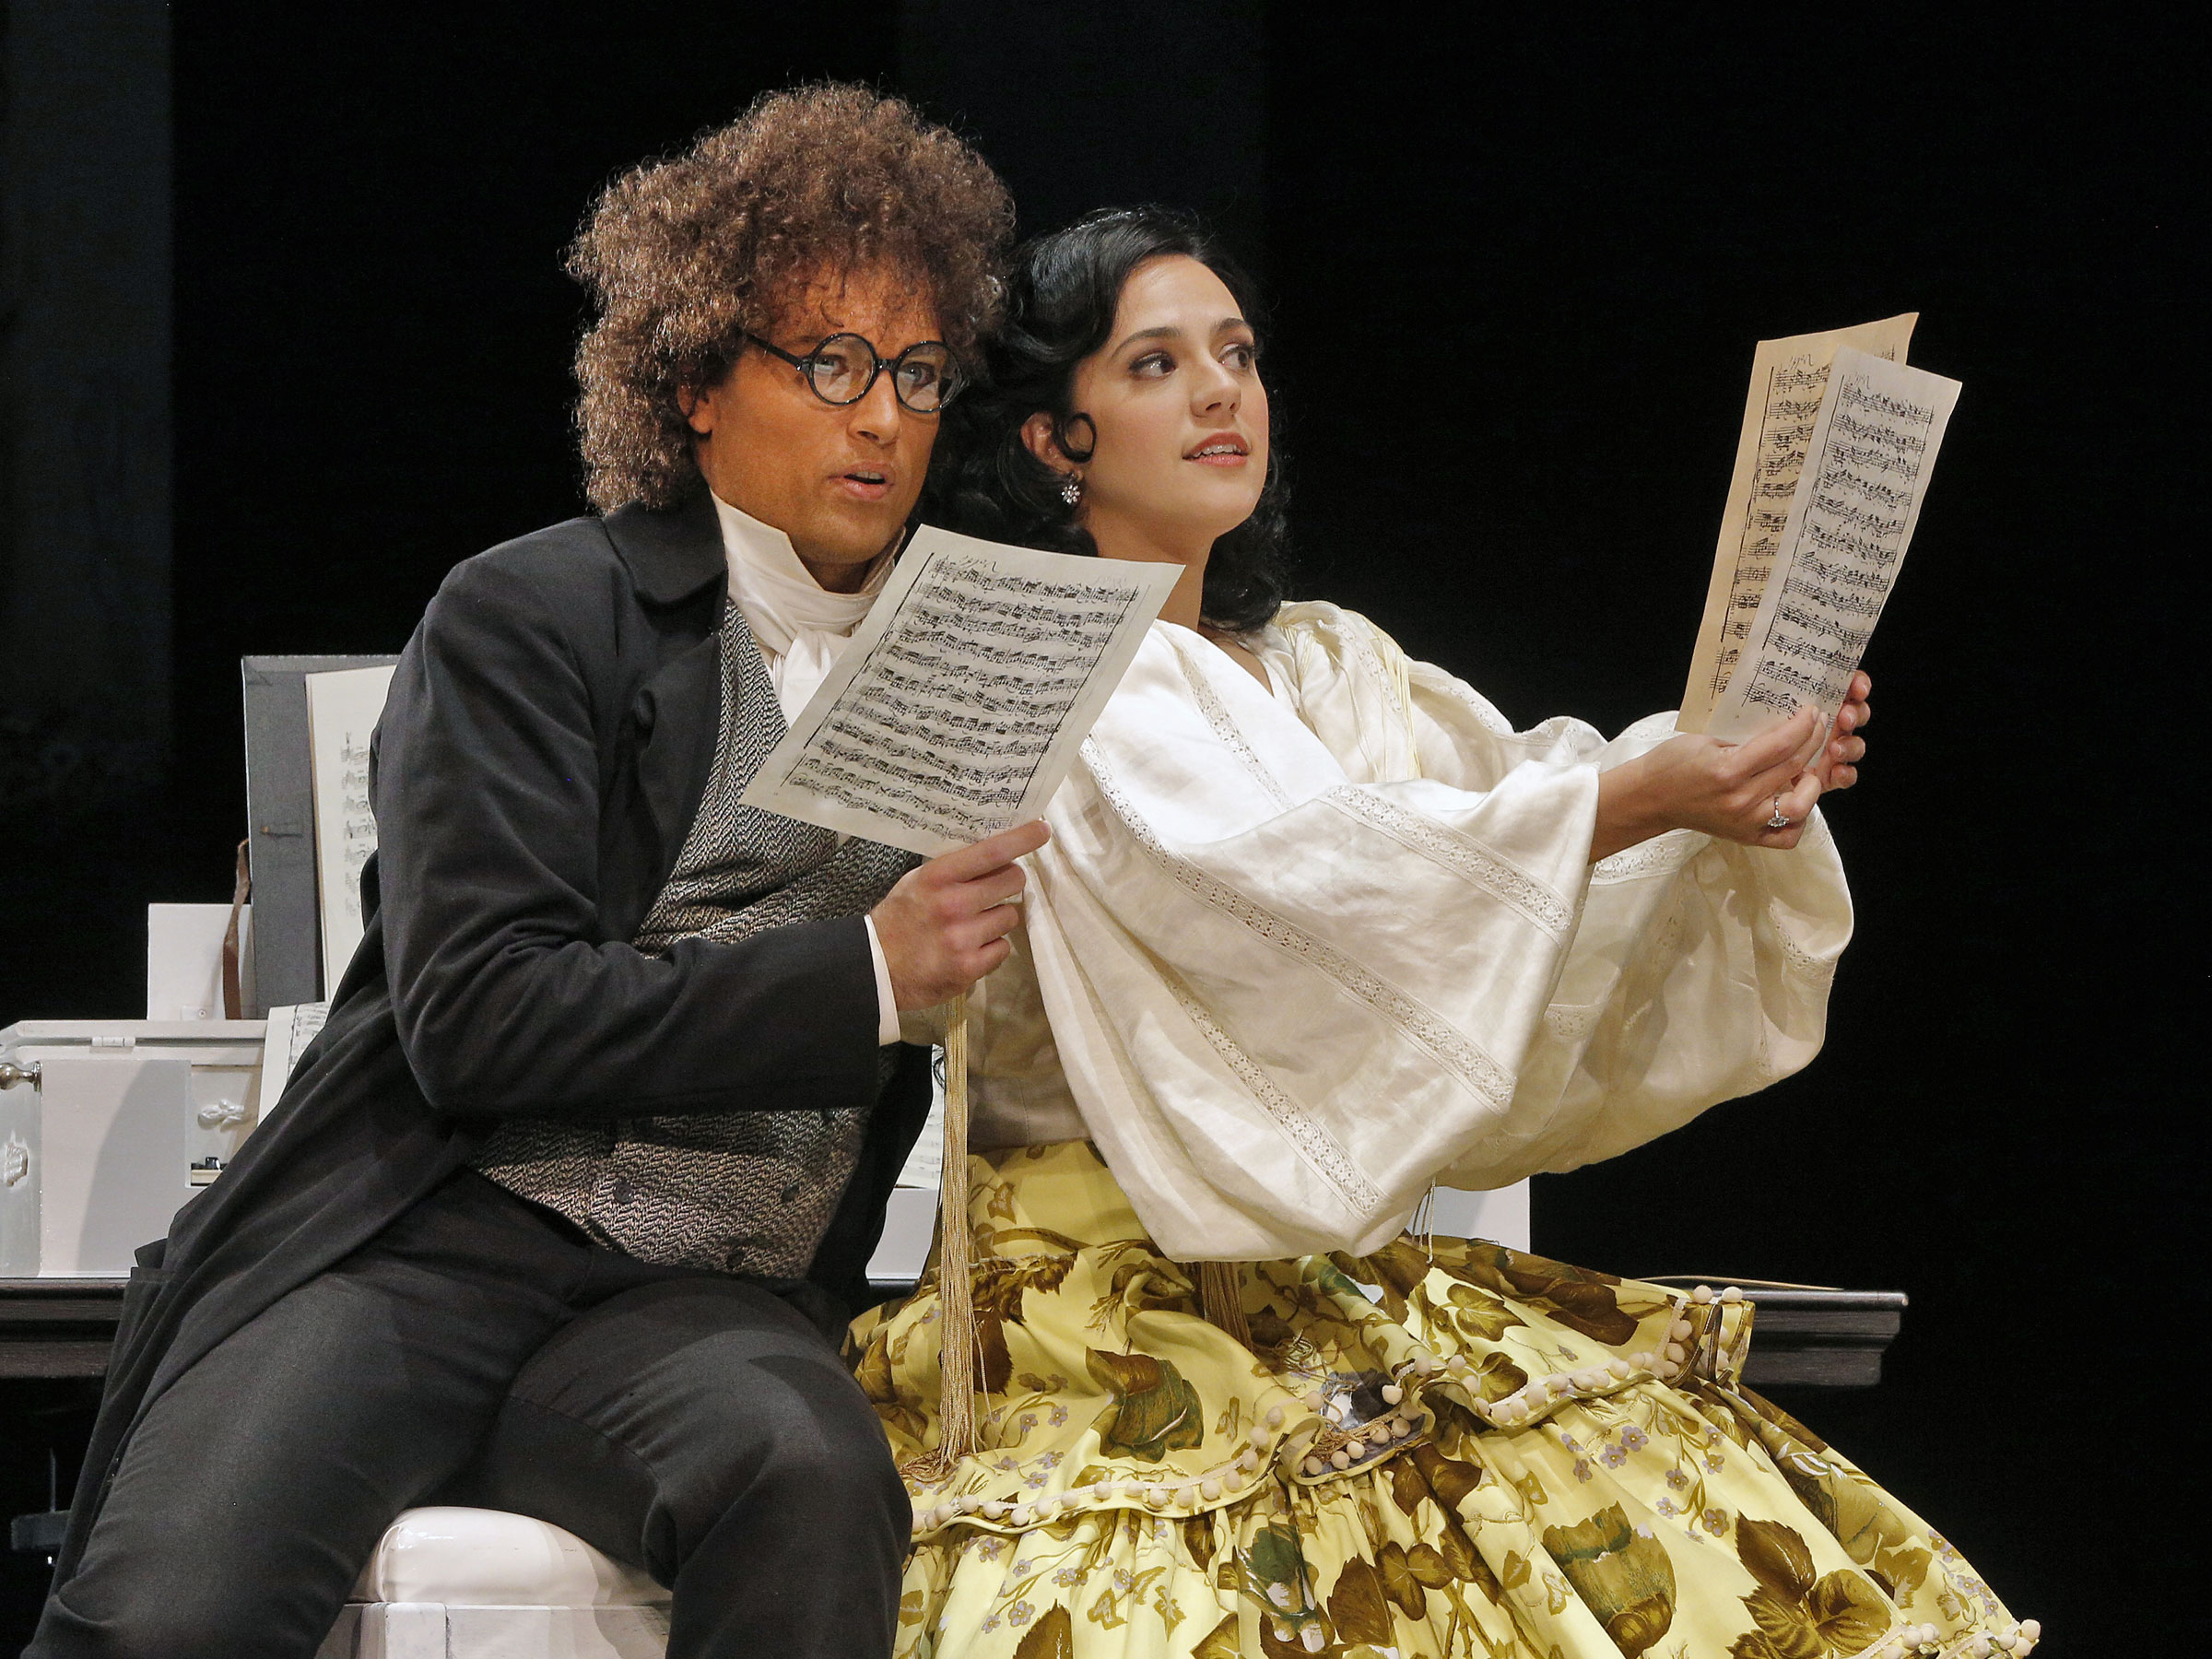 A man with curly hair in a suit is sitting in a chair next to a woman wearing a white blouse and gold skirt. They are holding up paper scripts.